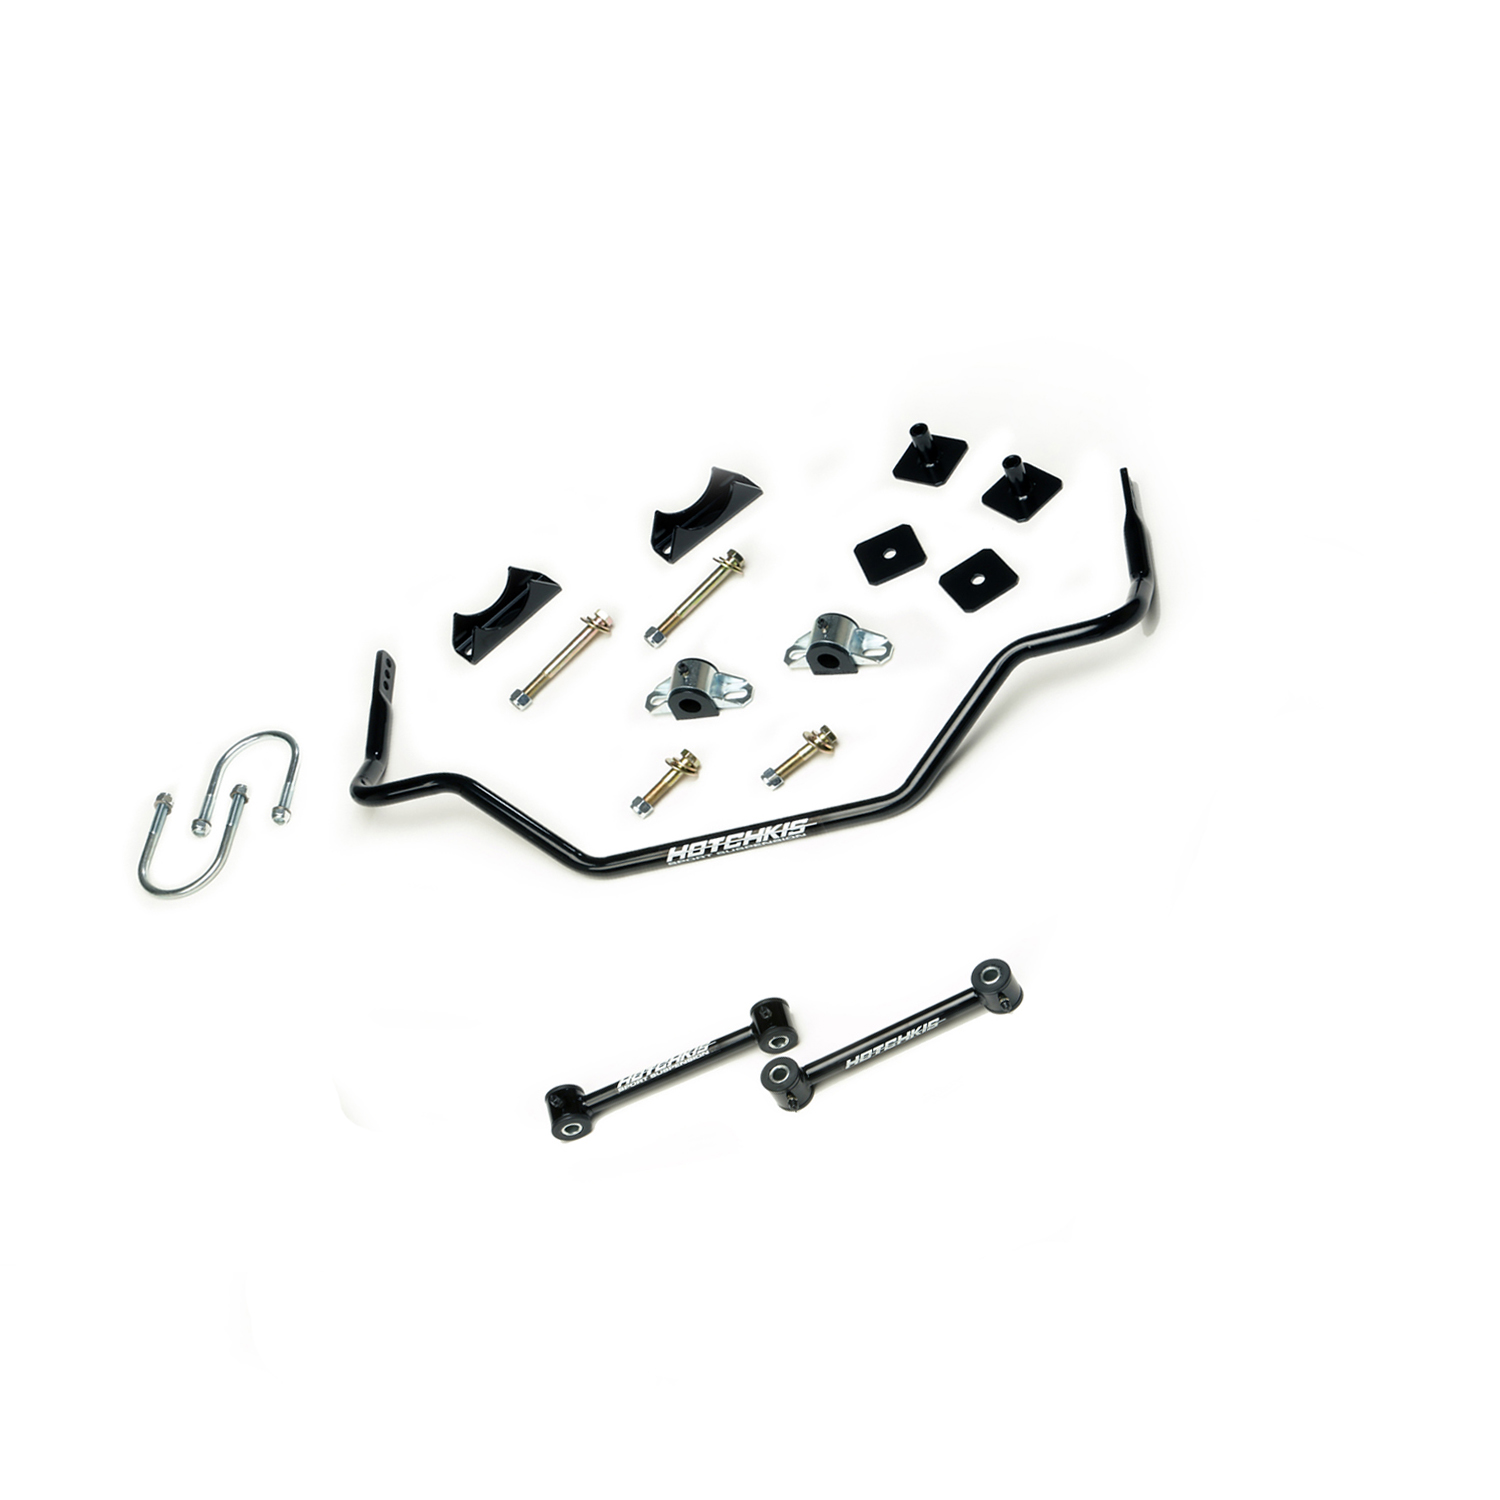 1964  – 1966 Mustang Rear Sway Bar Set from Hotchkis Sport Suspension